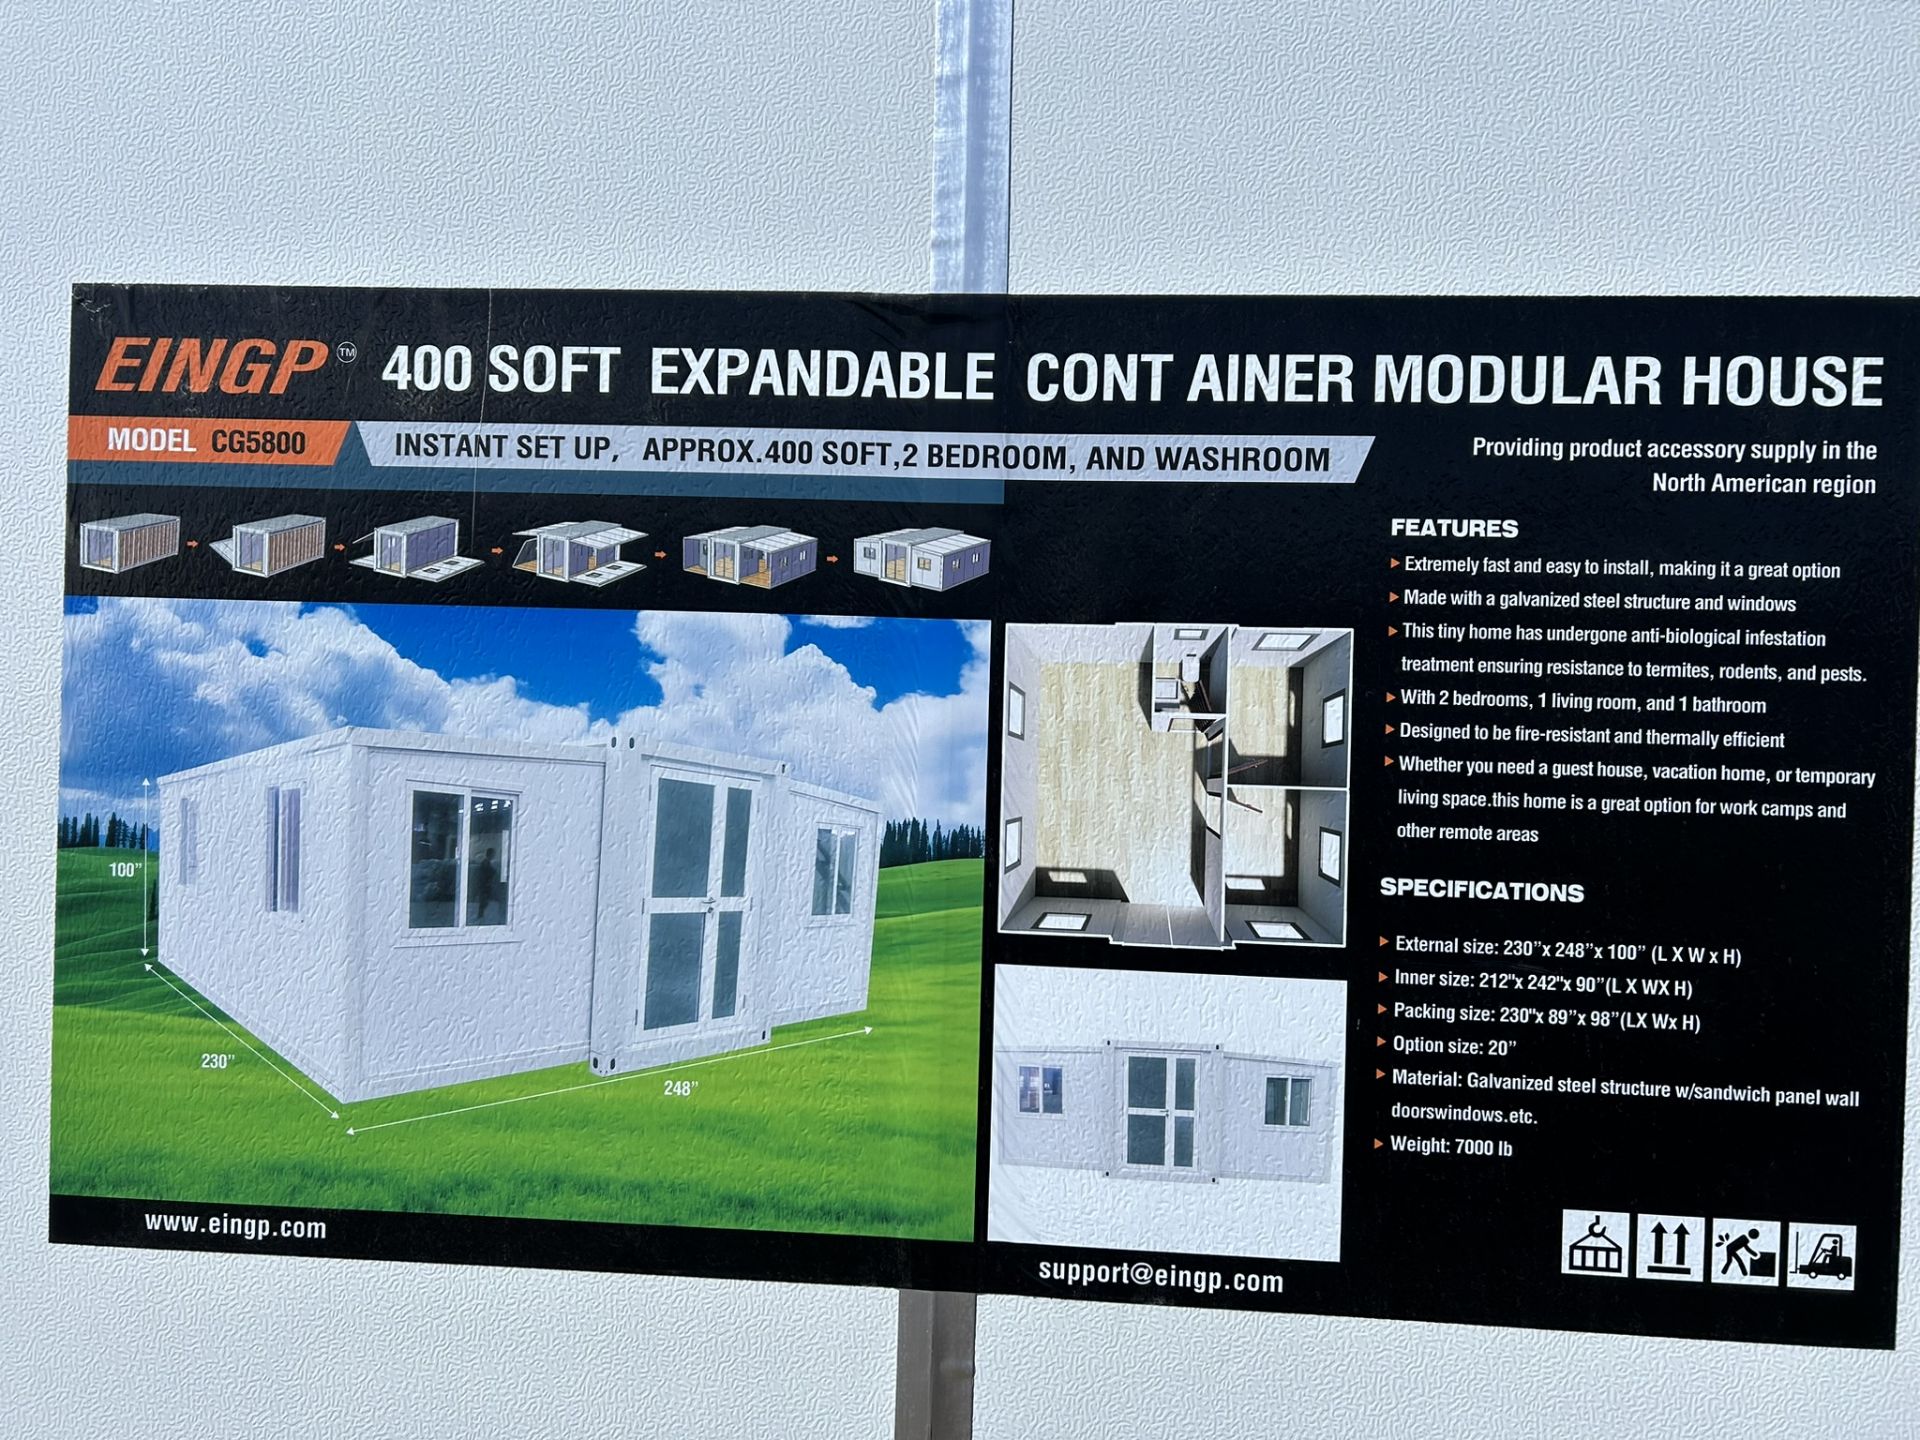 EINGP CG5800 400 SQFT EXPANDABLE CONTAINER MODULAR HOUSE, APPROX 400 SQFT. , 2-BEDROOM W/ WASHROOM - Image 6 of 11